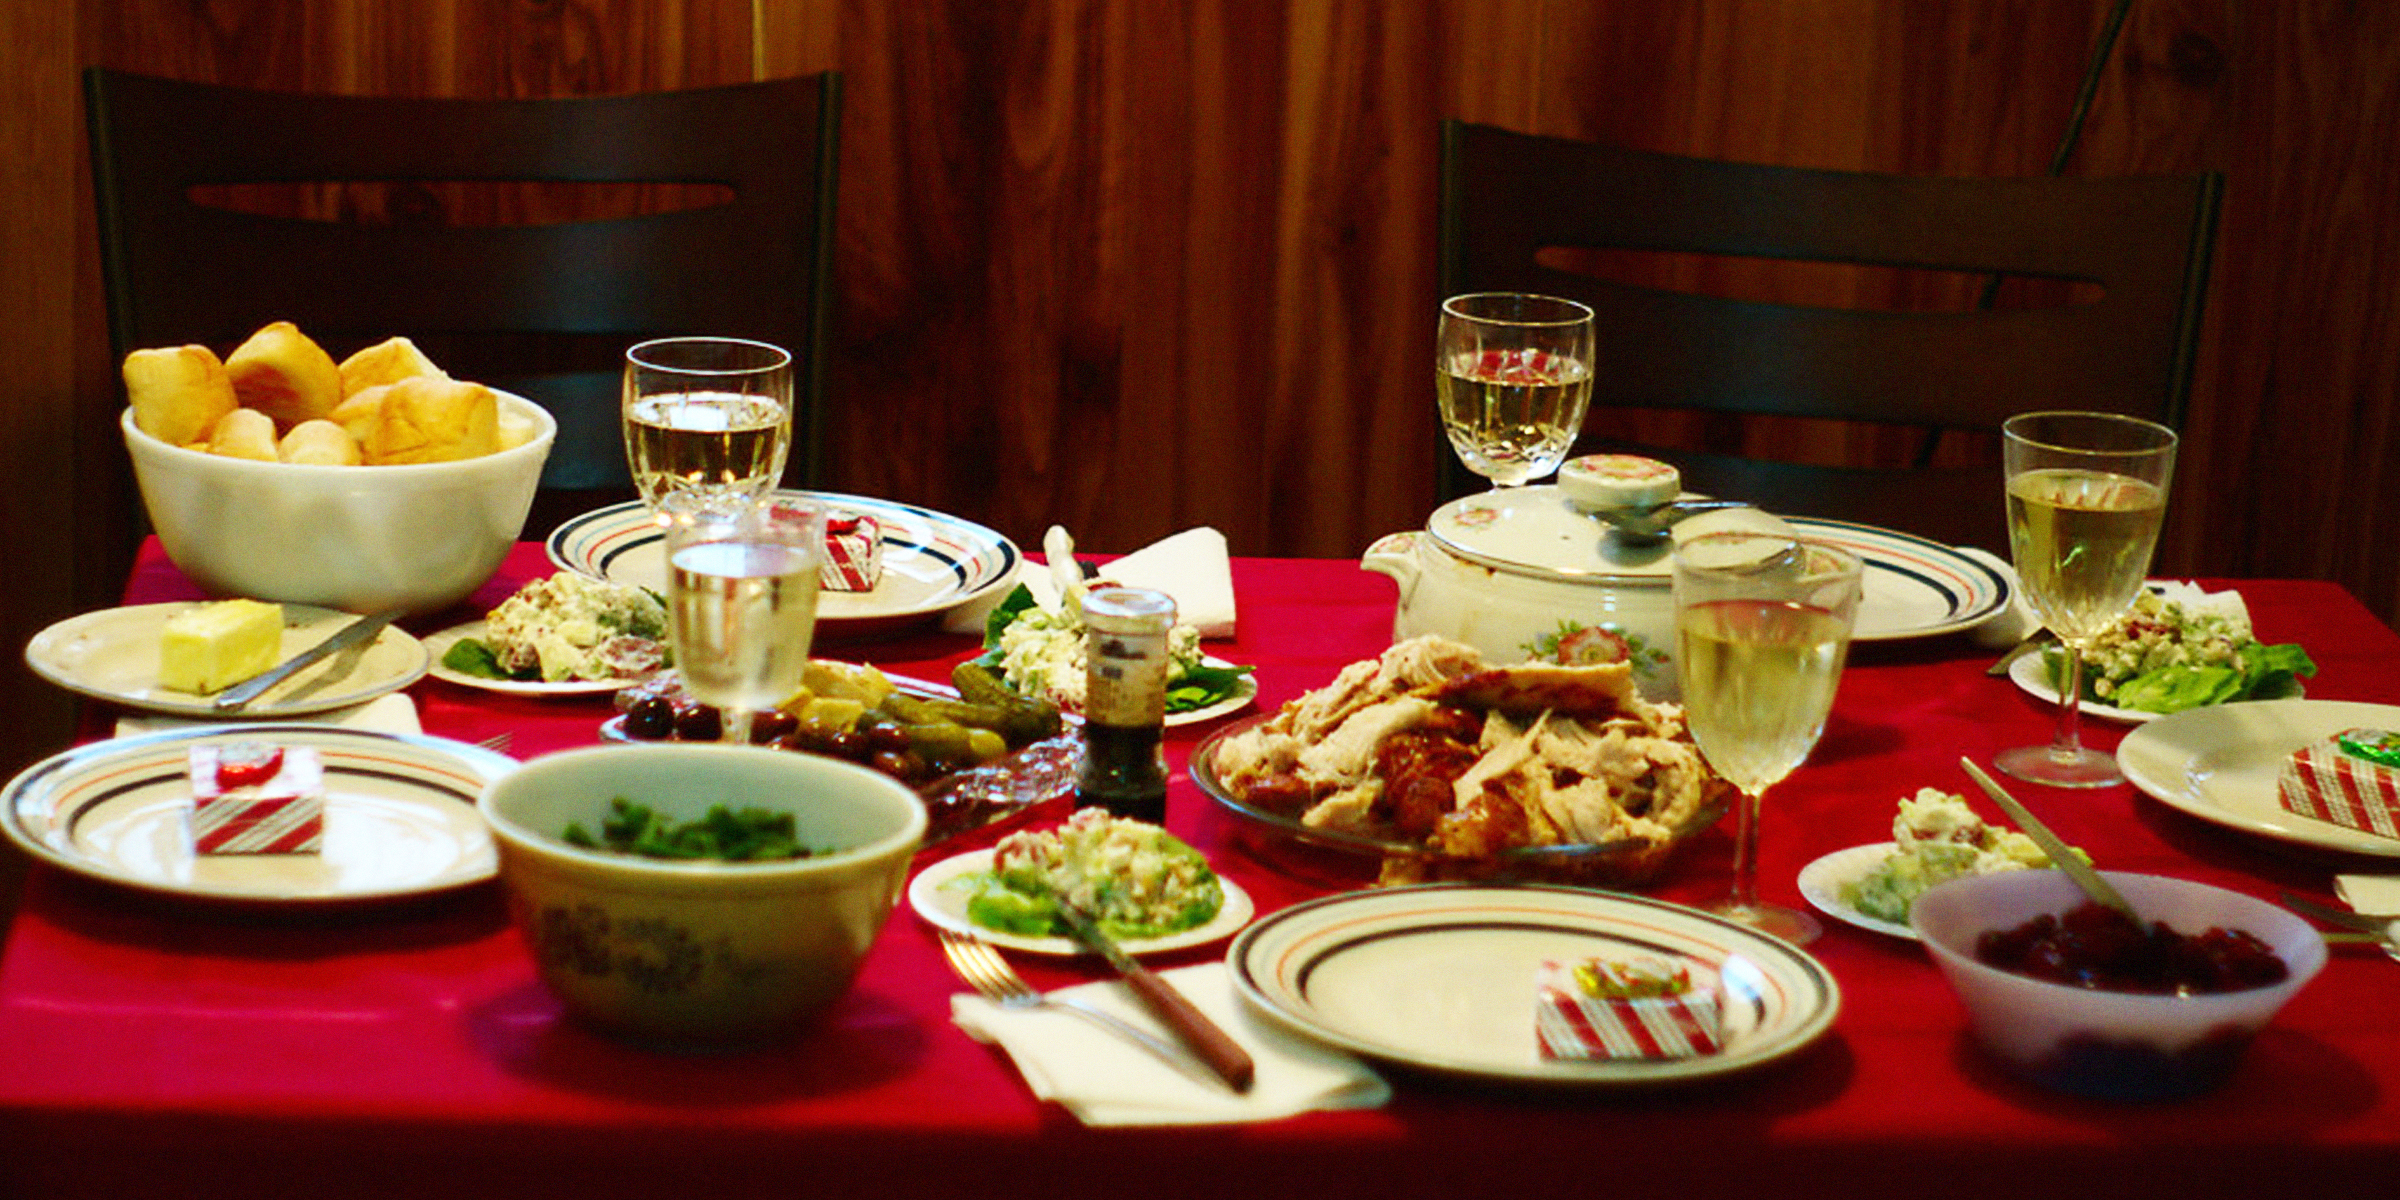 Table full of food | Source: Flickr